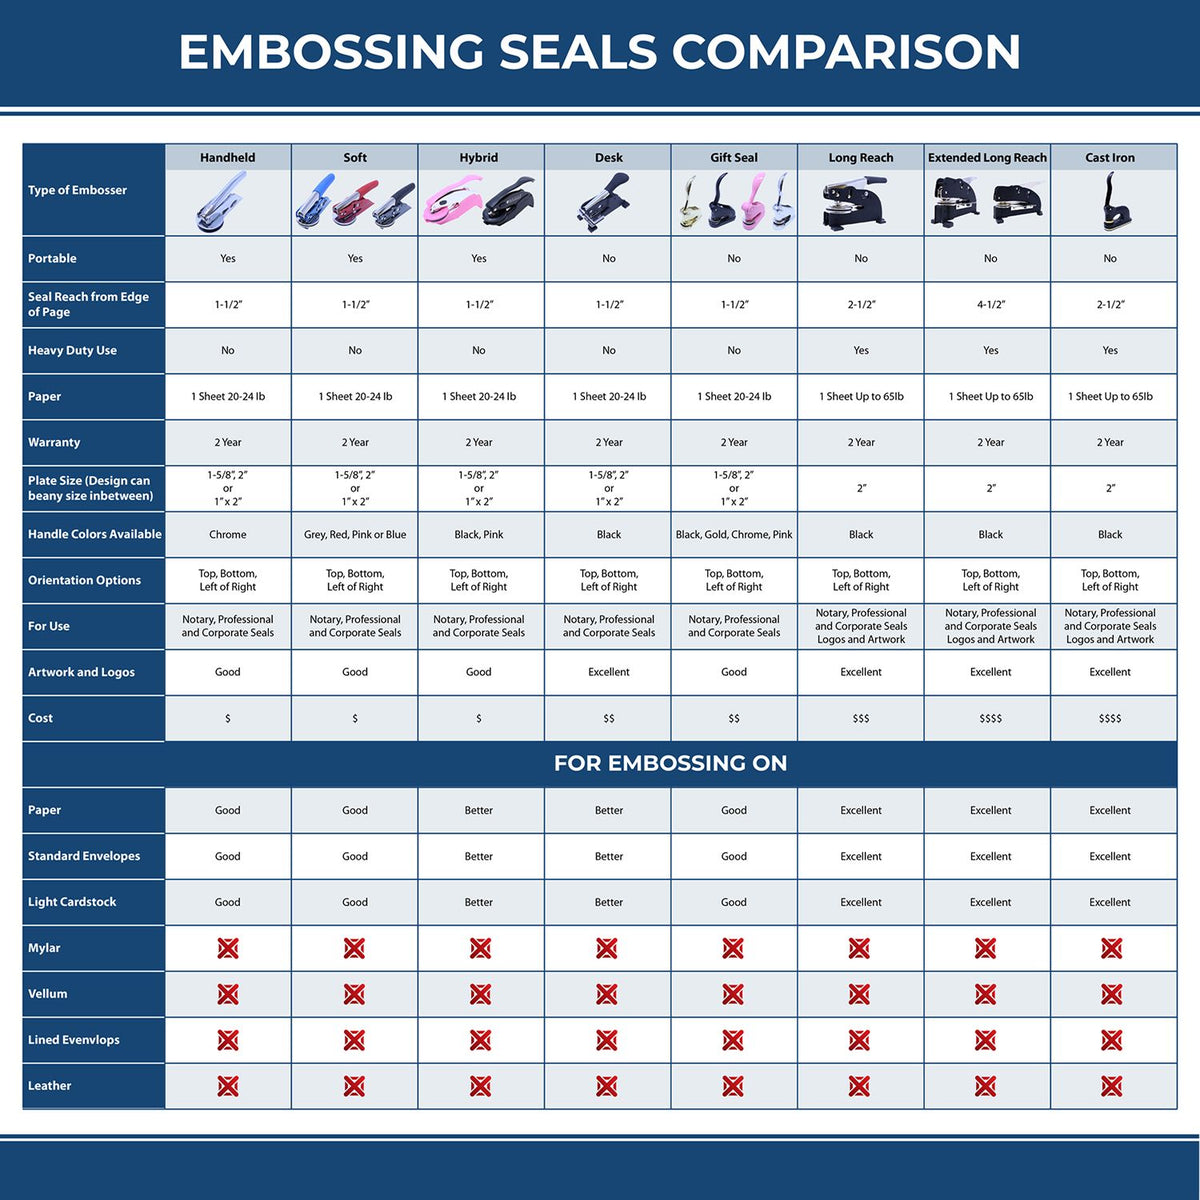 A comparison chart for the different types of mount models available for the Hybrid Montana Engineer Seal